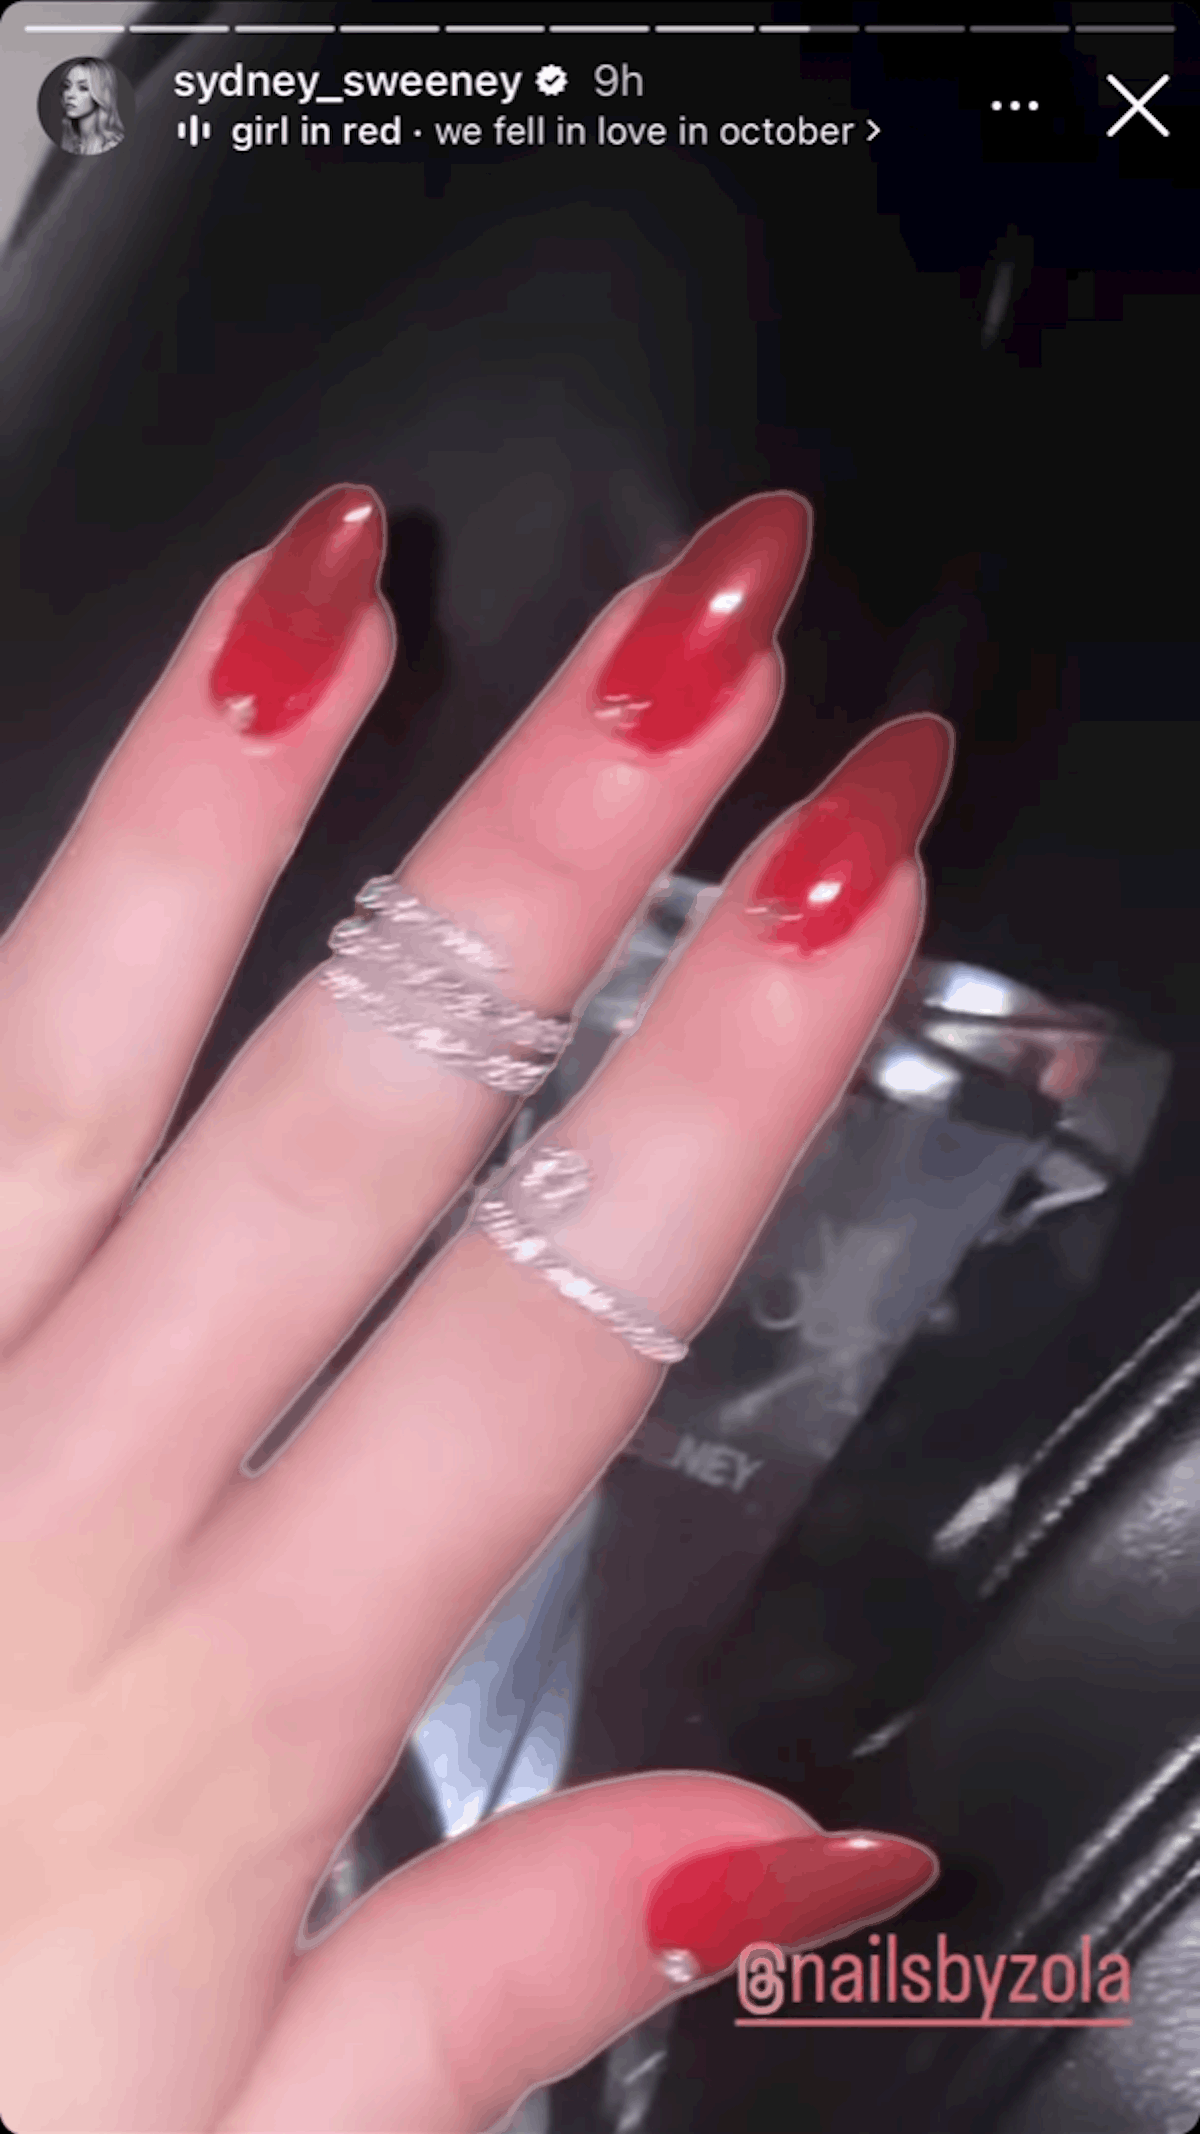 The importance of the manicure in Euphoria